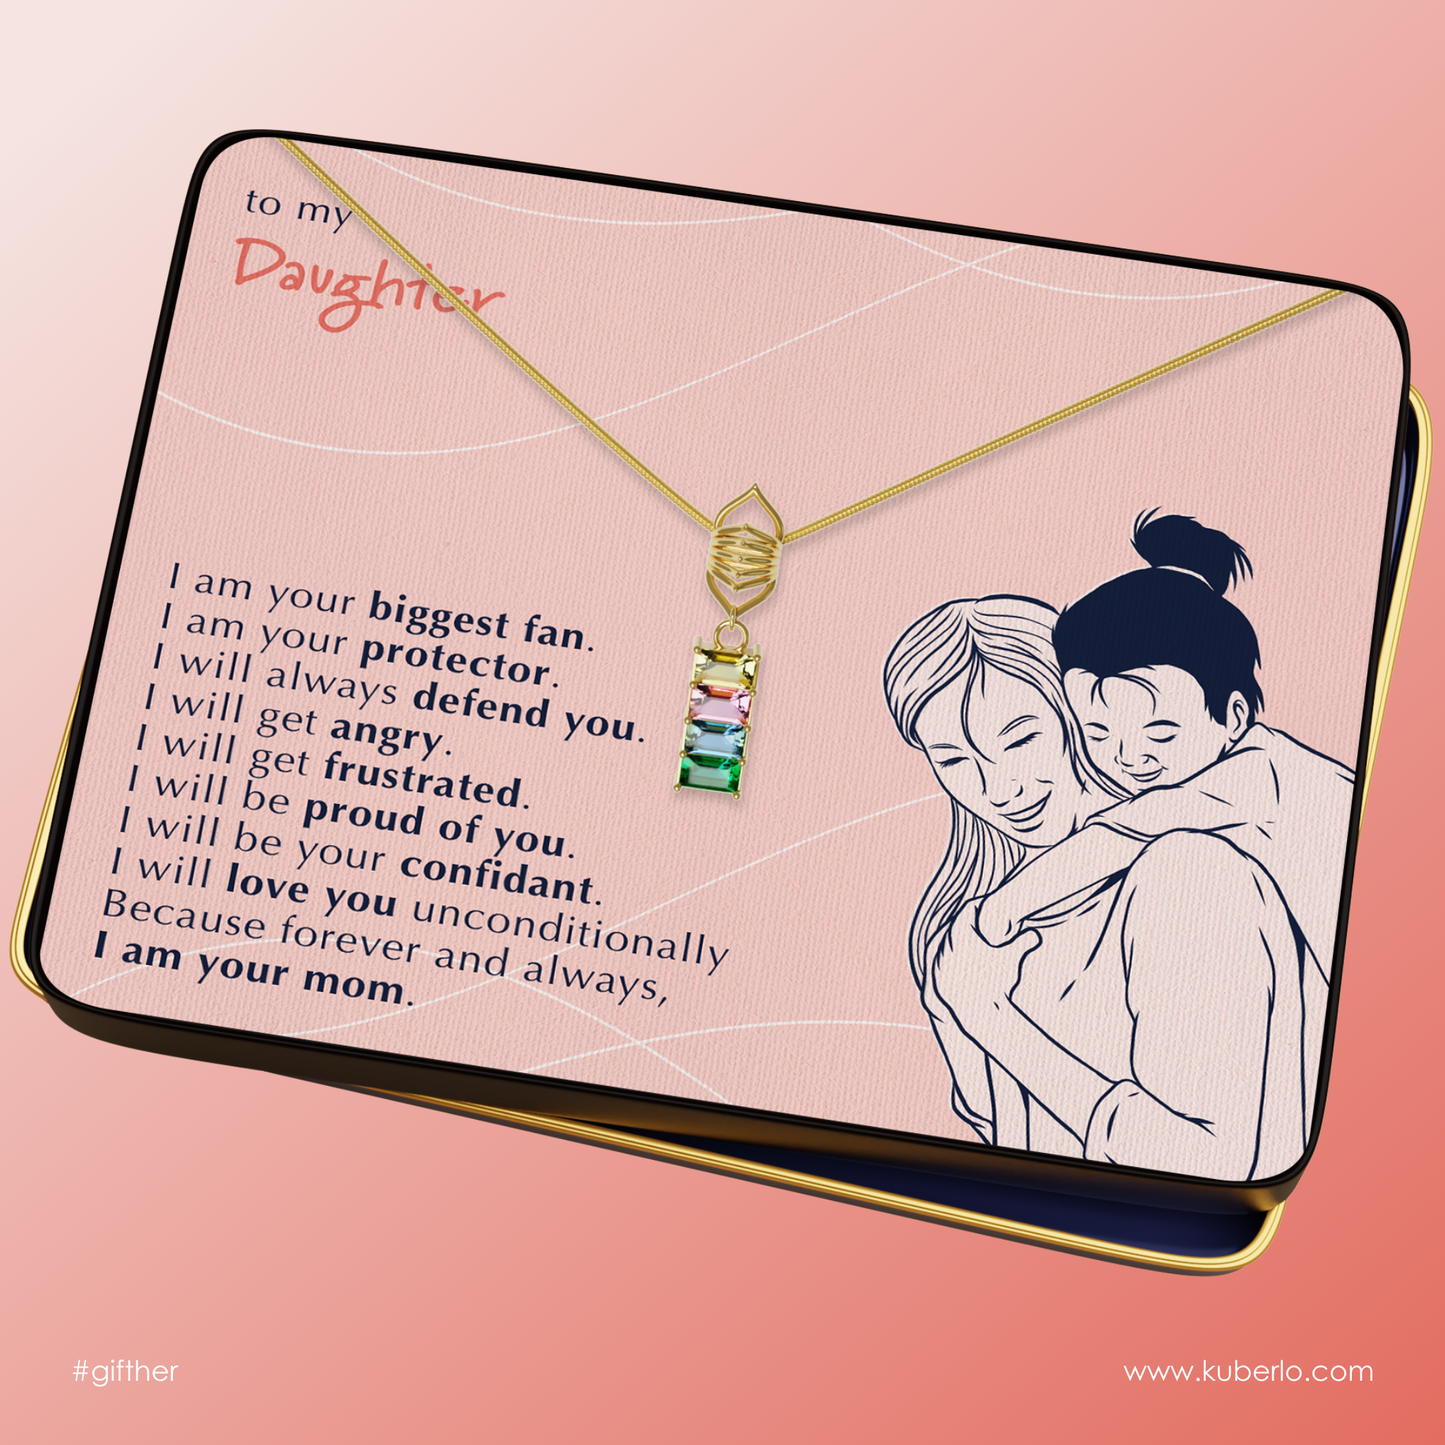 My Dear Daughter - I'm your biggest fan